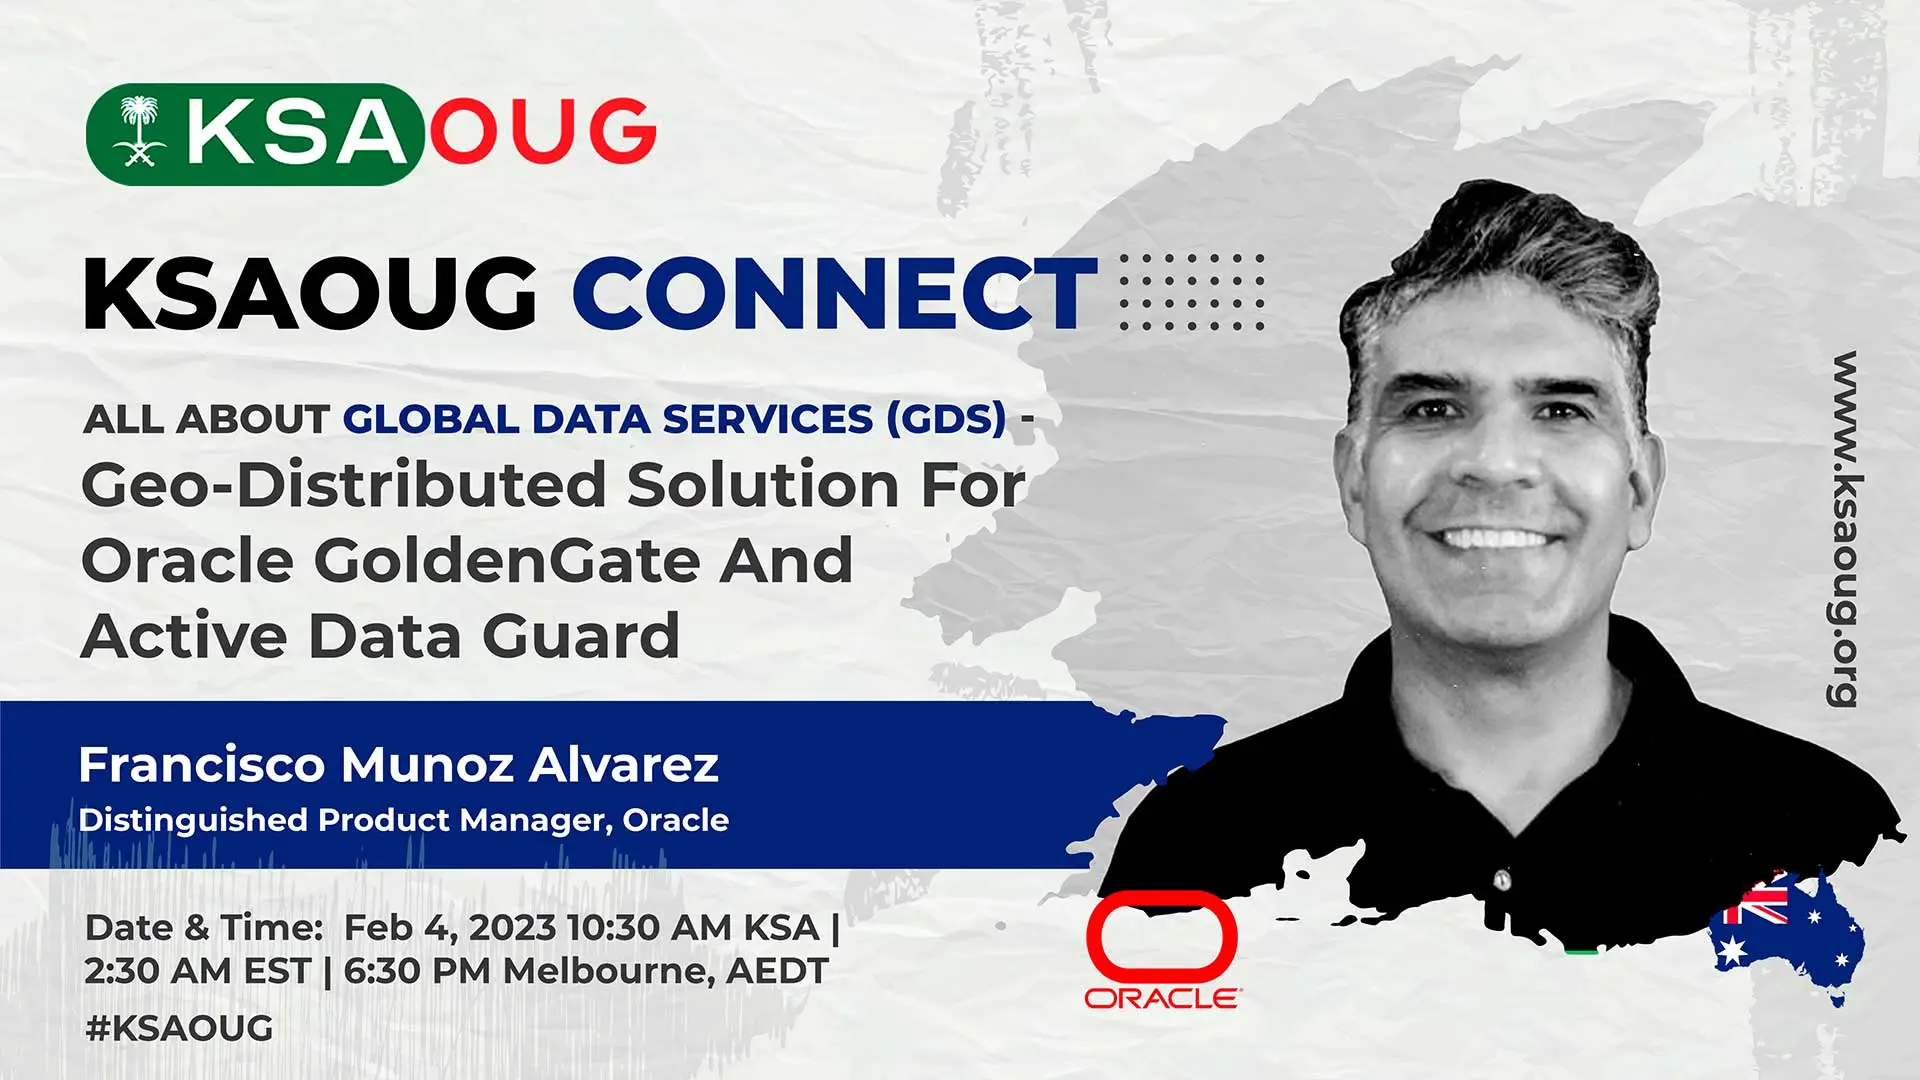 KSAOUG Connect With Francisco